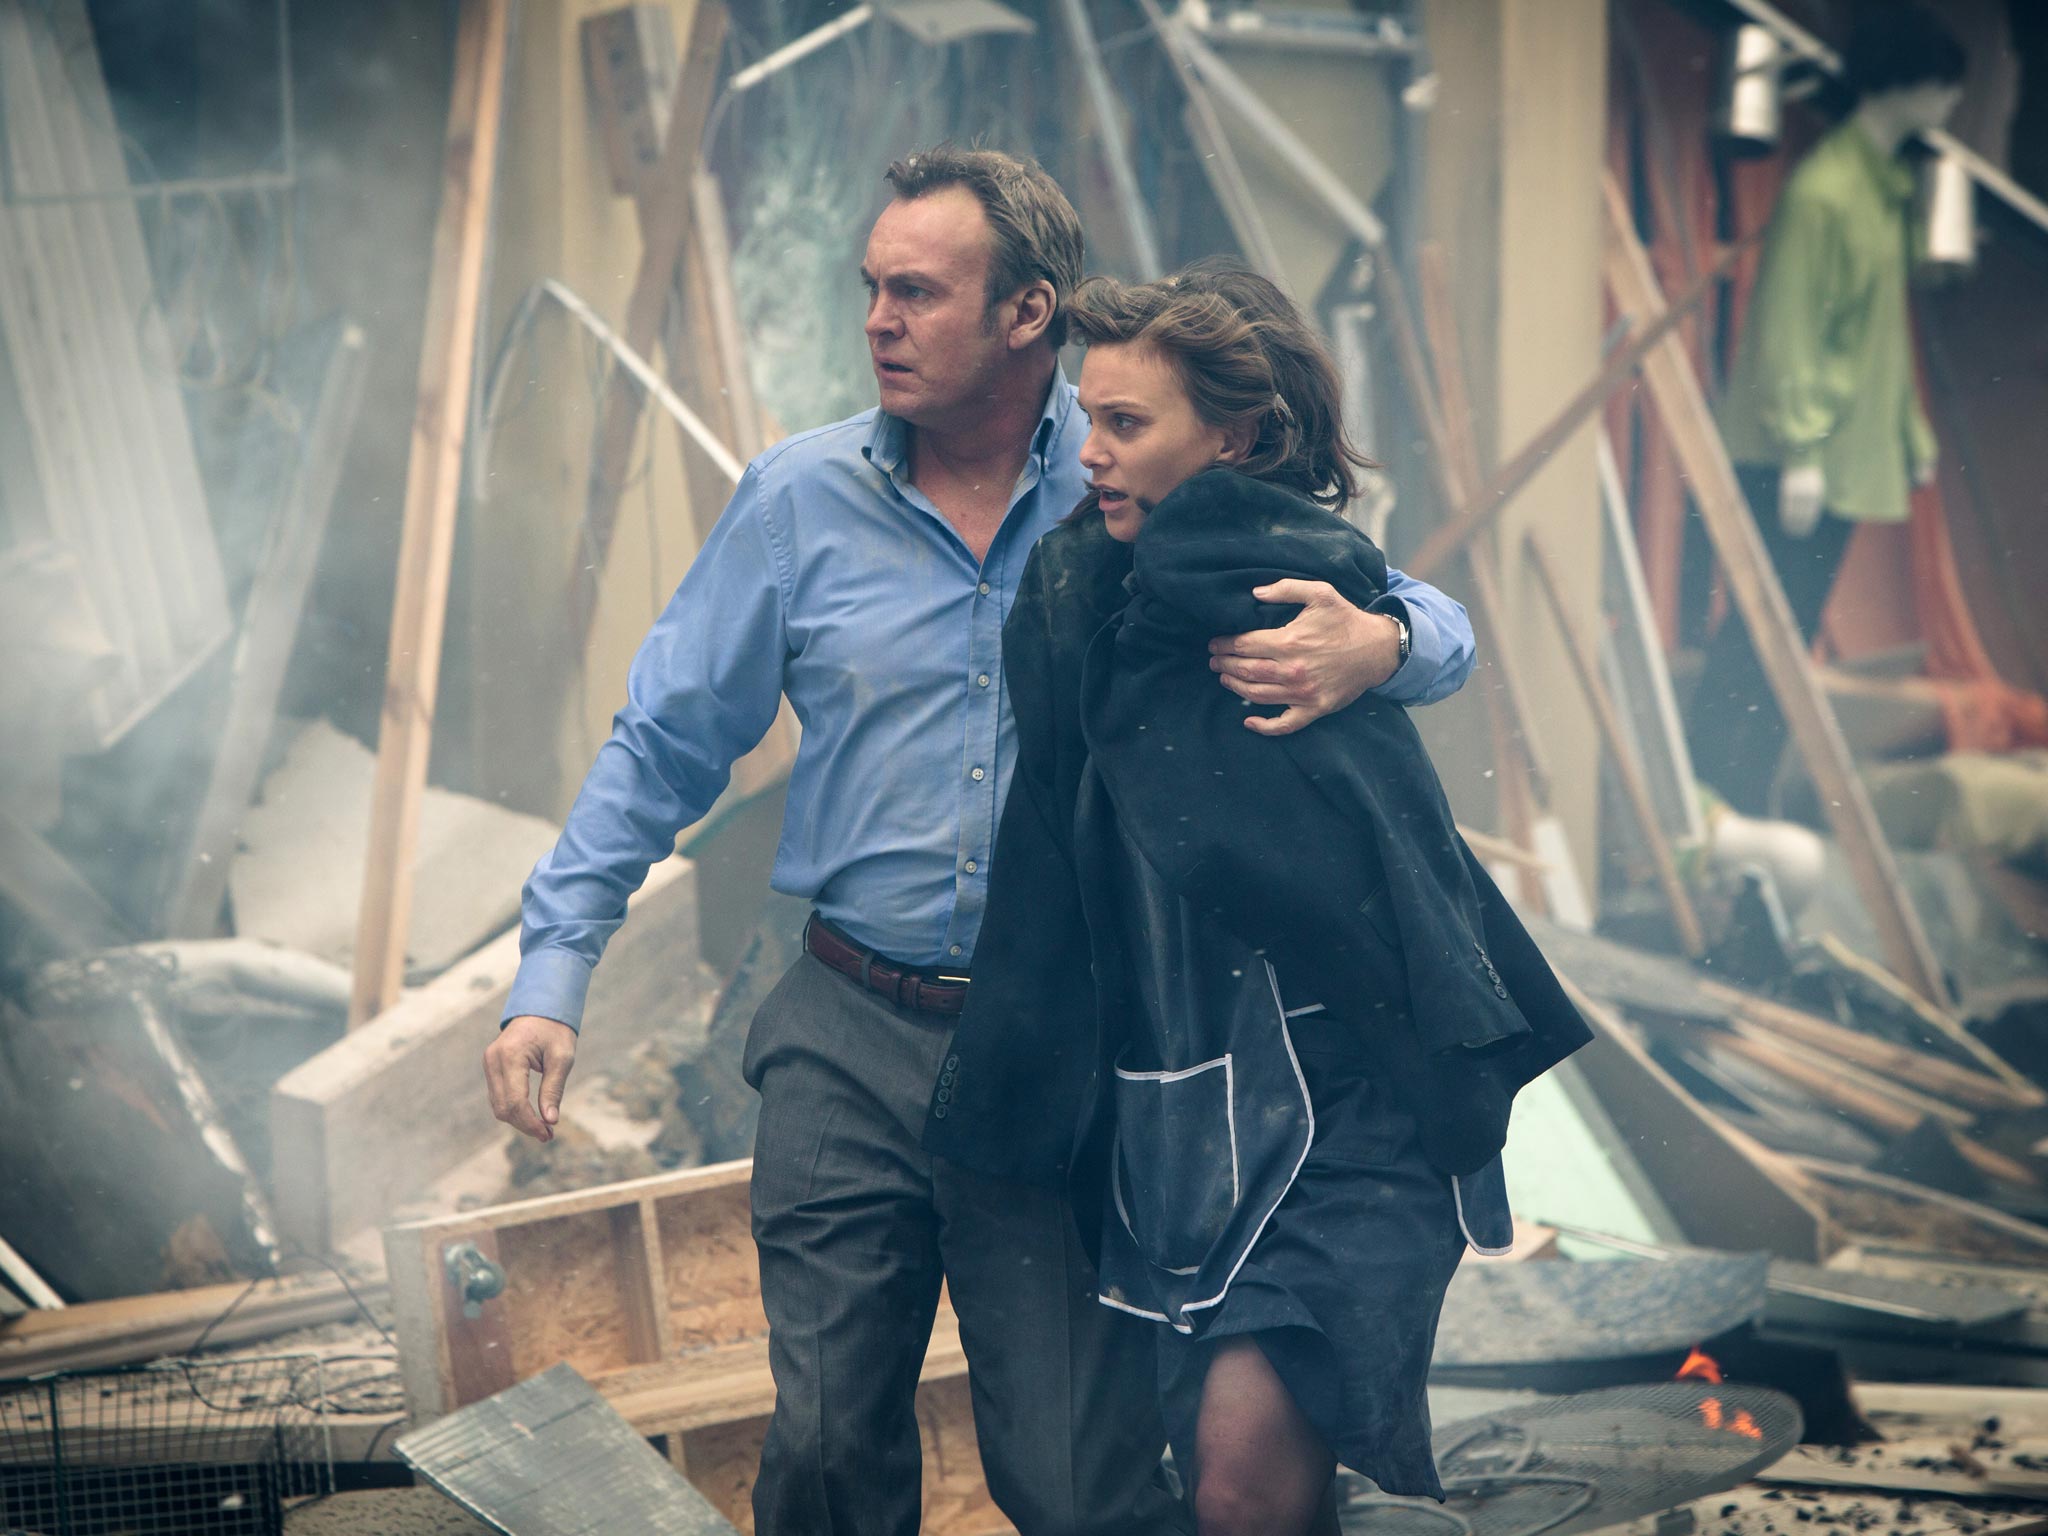 Rubble in mind: Philip Glenister and Liz White in ‘From There to Here’